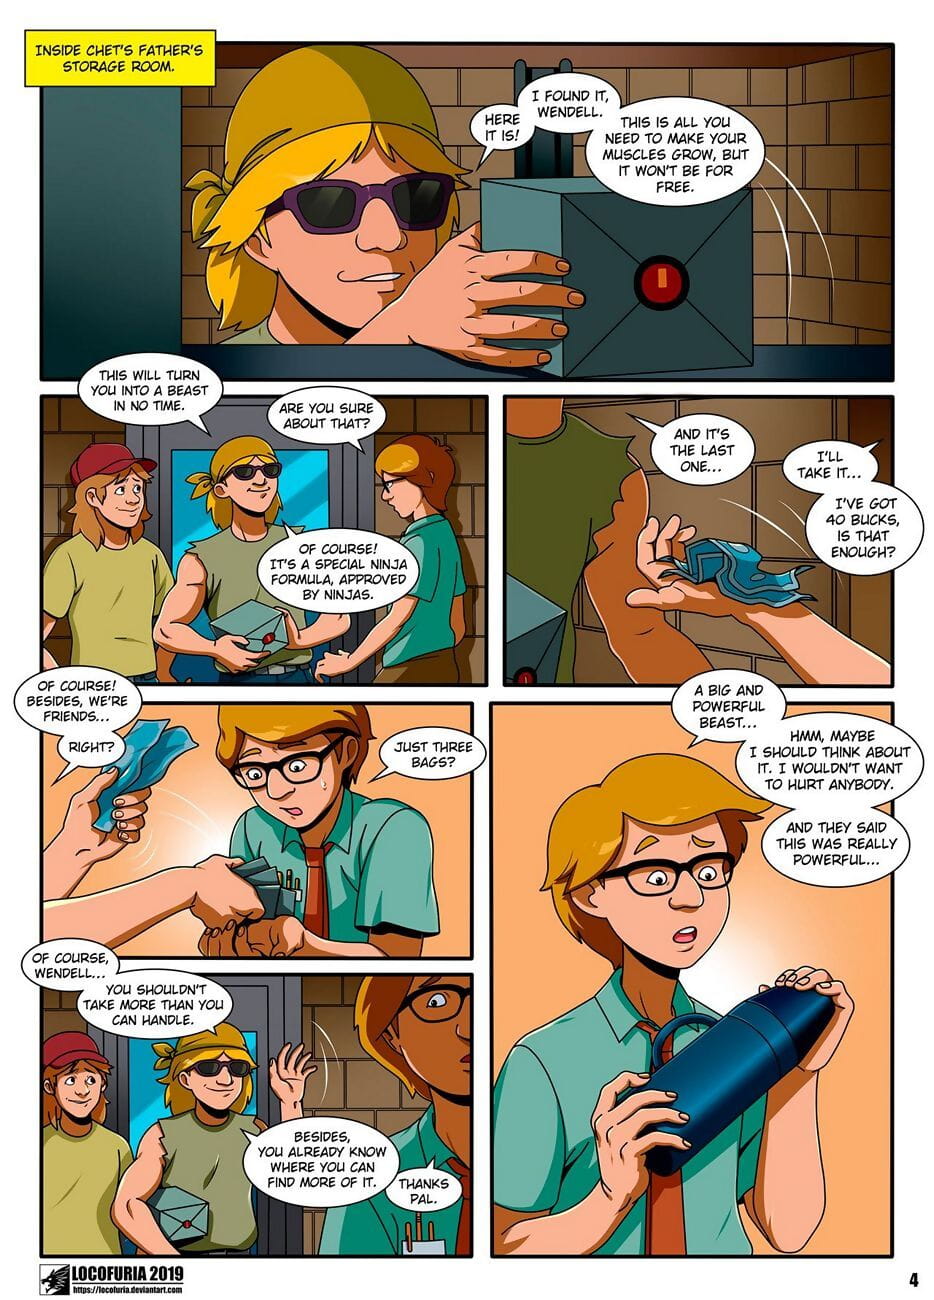 Wild Infusion 1 - part 2 page 1